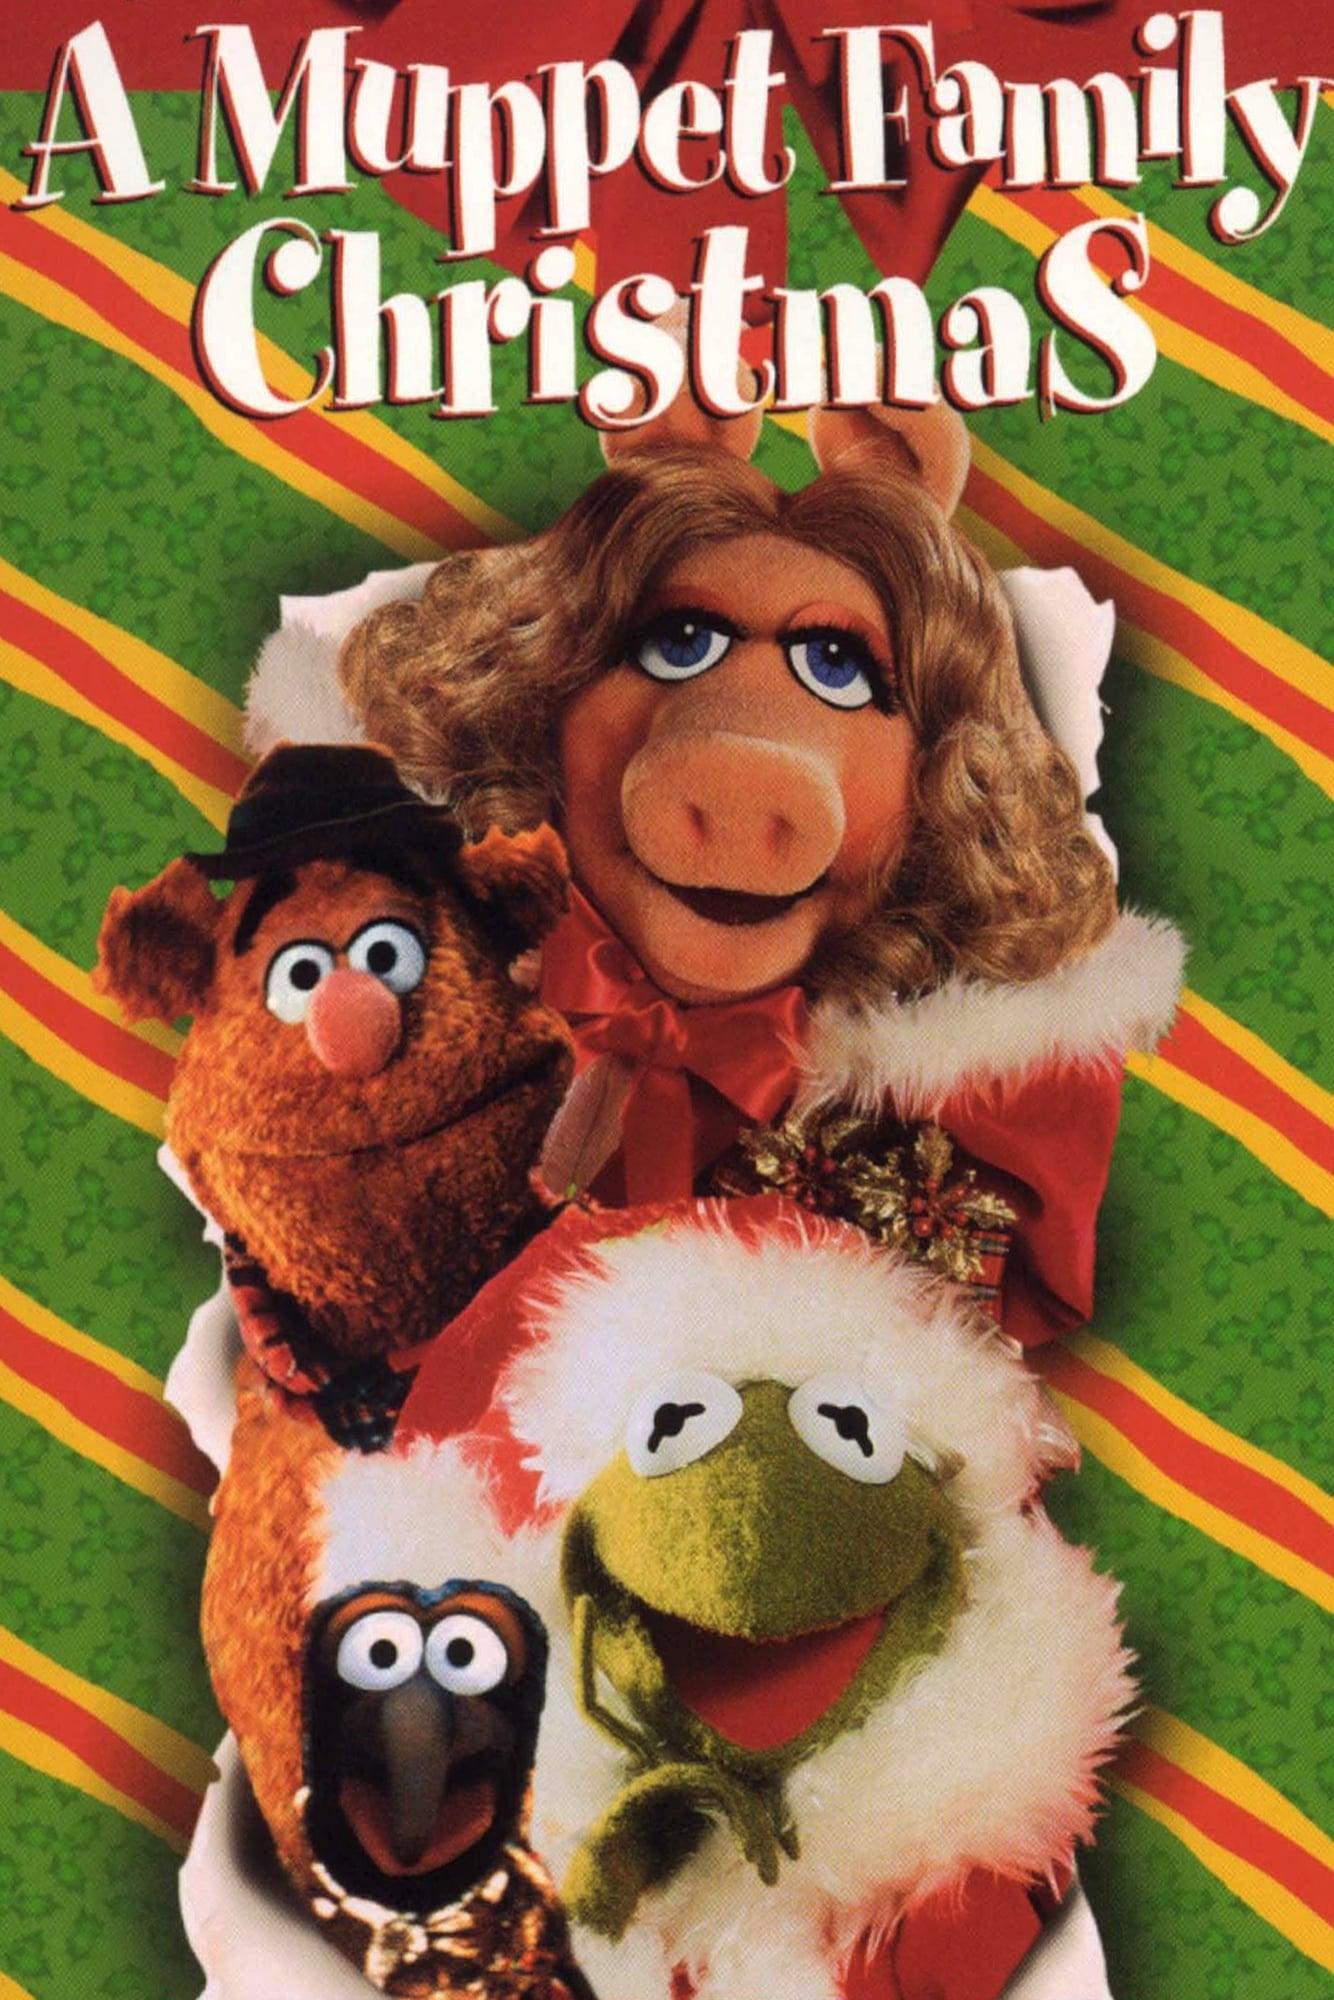 A Muppet Family Christmas poster